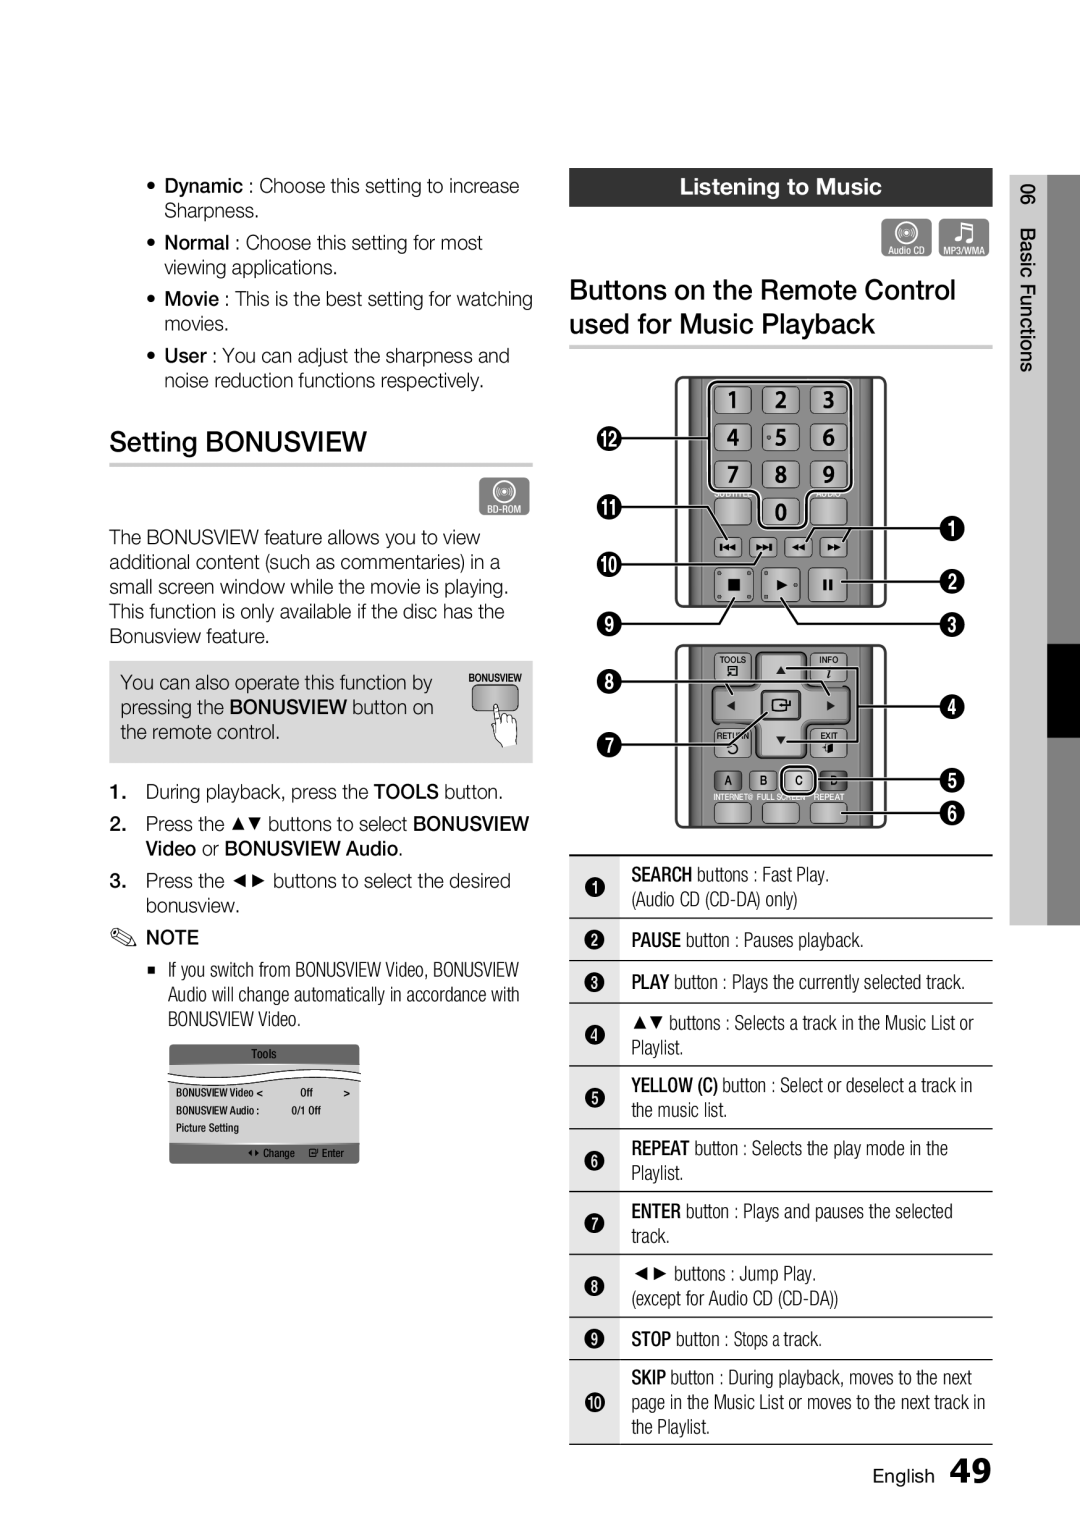 Samsung BD-C7500/XEE manual Setting BONUSVIEW, Buttons on the Remote Control used for Music Playback, Listening to Music 